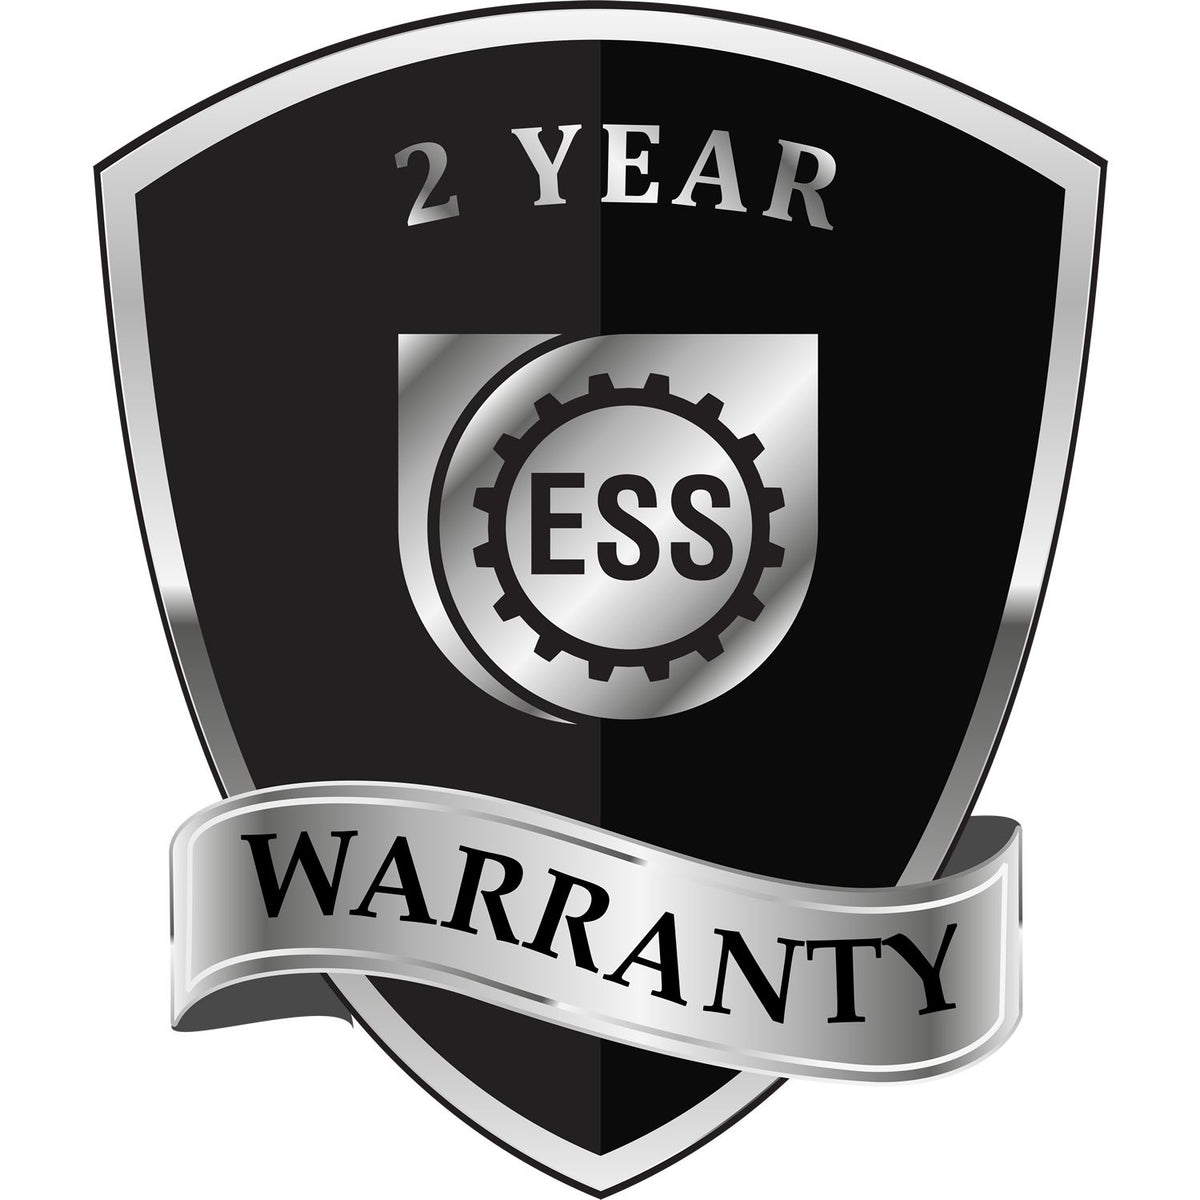 A badge or emblem showing a warranty icon for the Hawaii Engineer Desk Seal